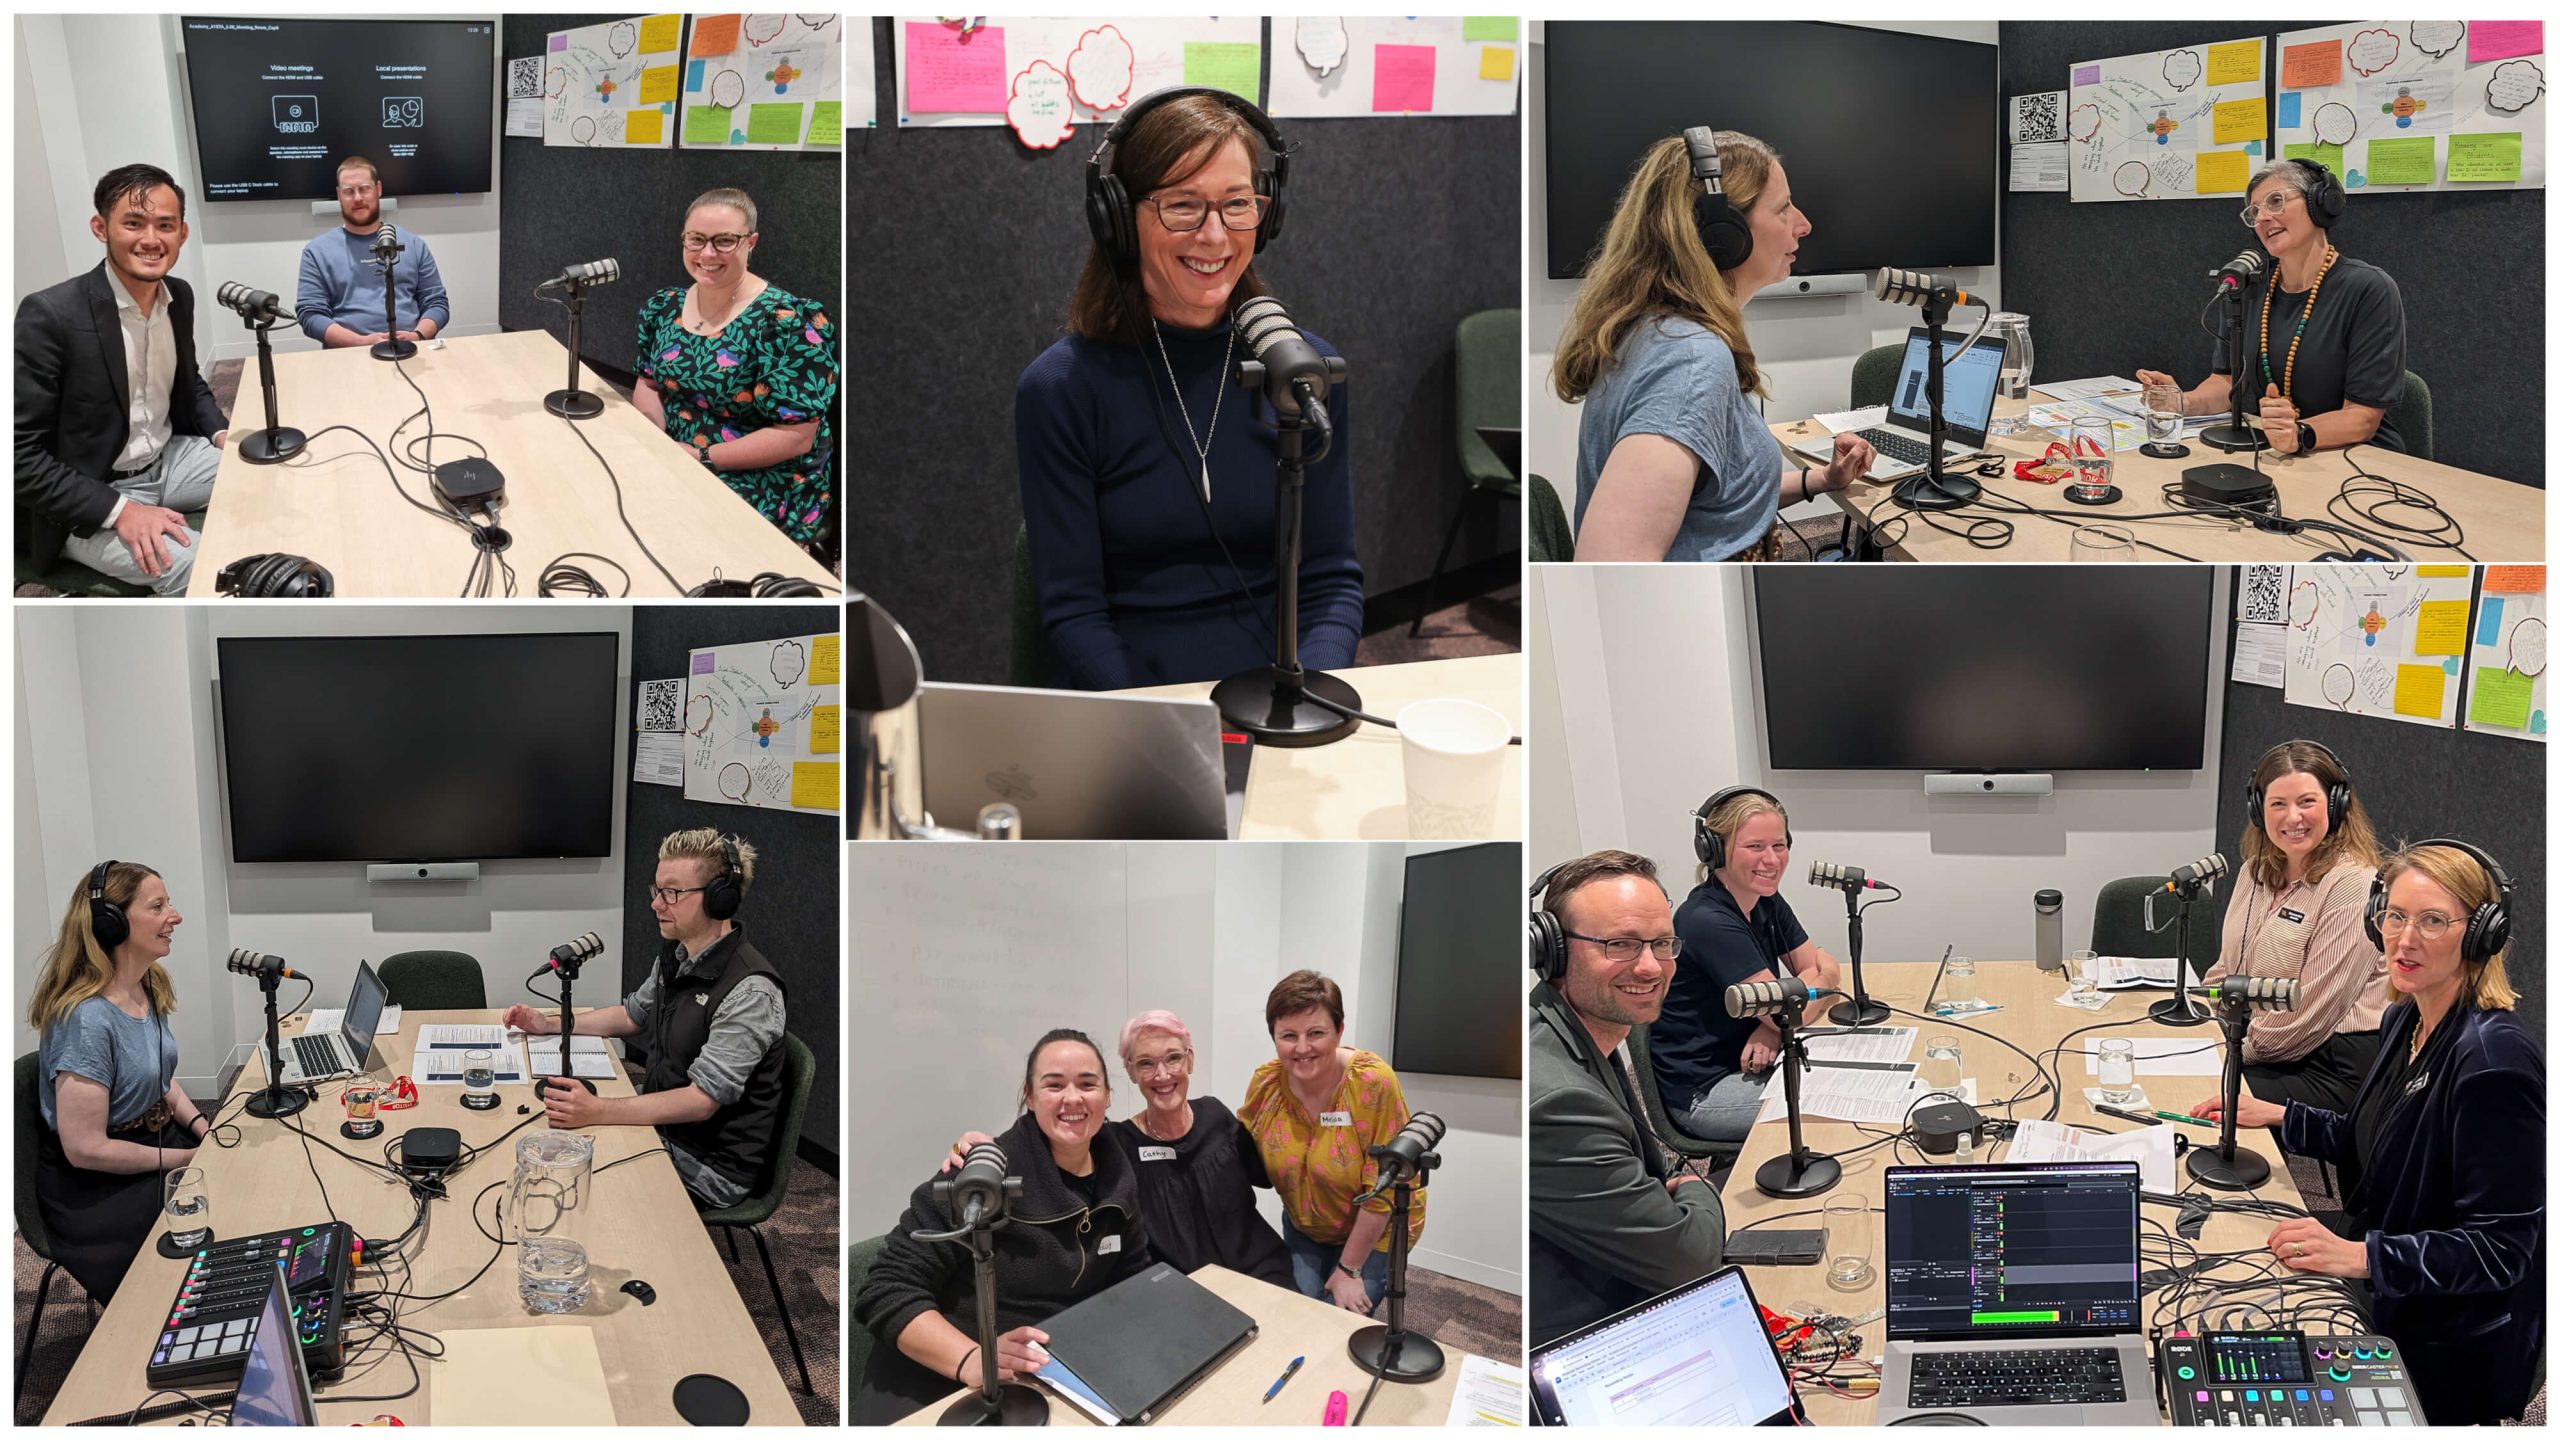 Behind the scenes montage of the Victorian Academy of Teaching and Leadership team recording podcasts in their office